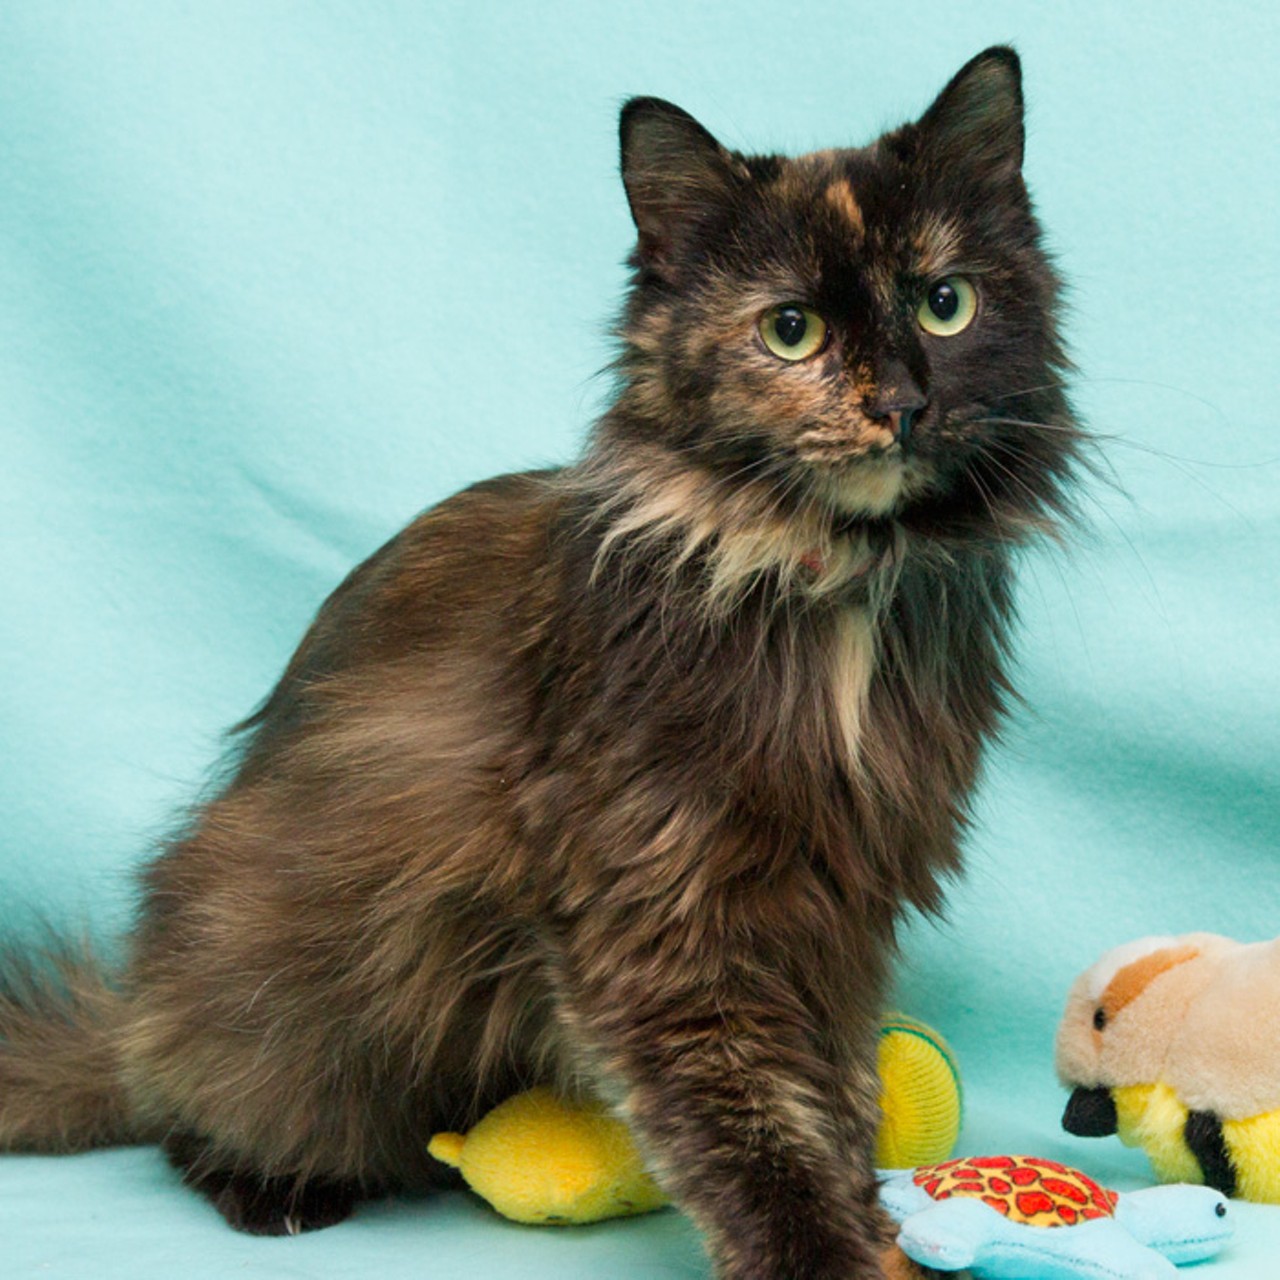 NAME: Snickers
NAME: Snickers
GENDER: Female
BREED: Domestic Long Hair
AGE: 4 years, 1 month
WEIGHT: 7 pounds
SPECIAL CONSIDERATIONS: None
REASON I CAME TO MHS: Agency transfer
LOCATION: Premier Pet Supply of Novi
ID NUMBER: 862306